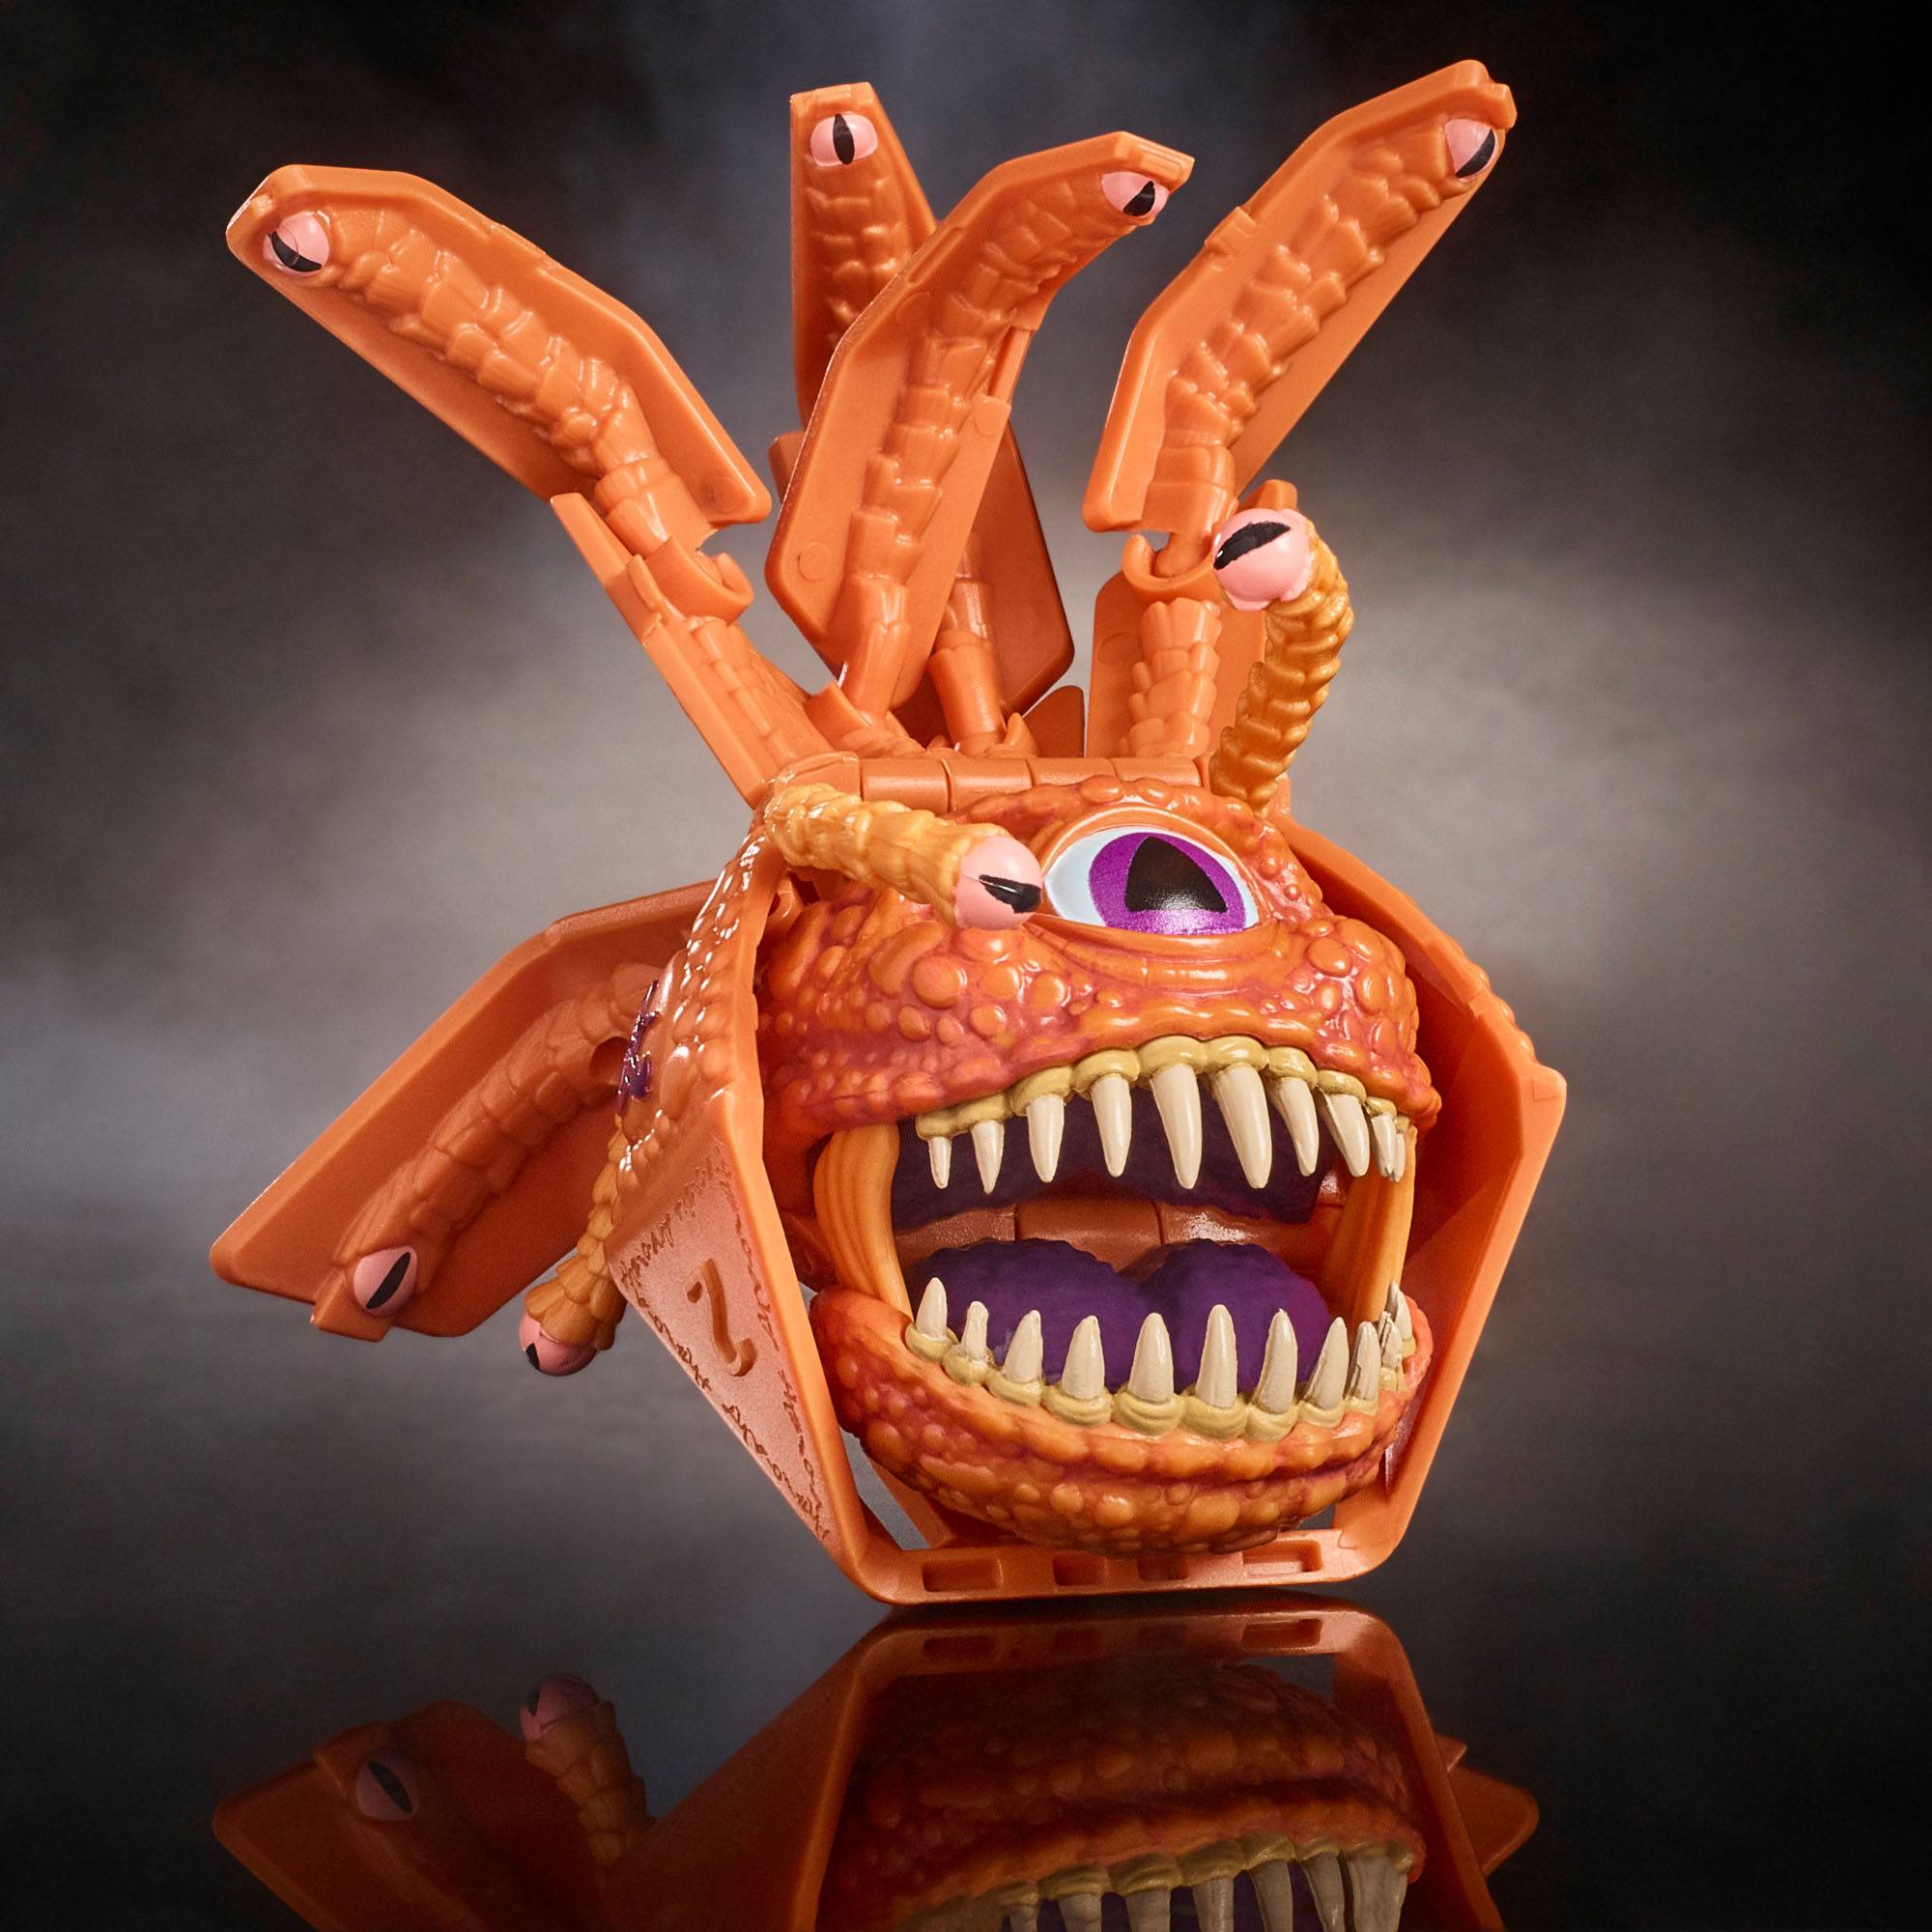 Dungeons & Dragons: Honor Among Thieves Dicelings Action Figure Beholder - Loaded Dice Barry Vale of Glamorgan CF64 3HD